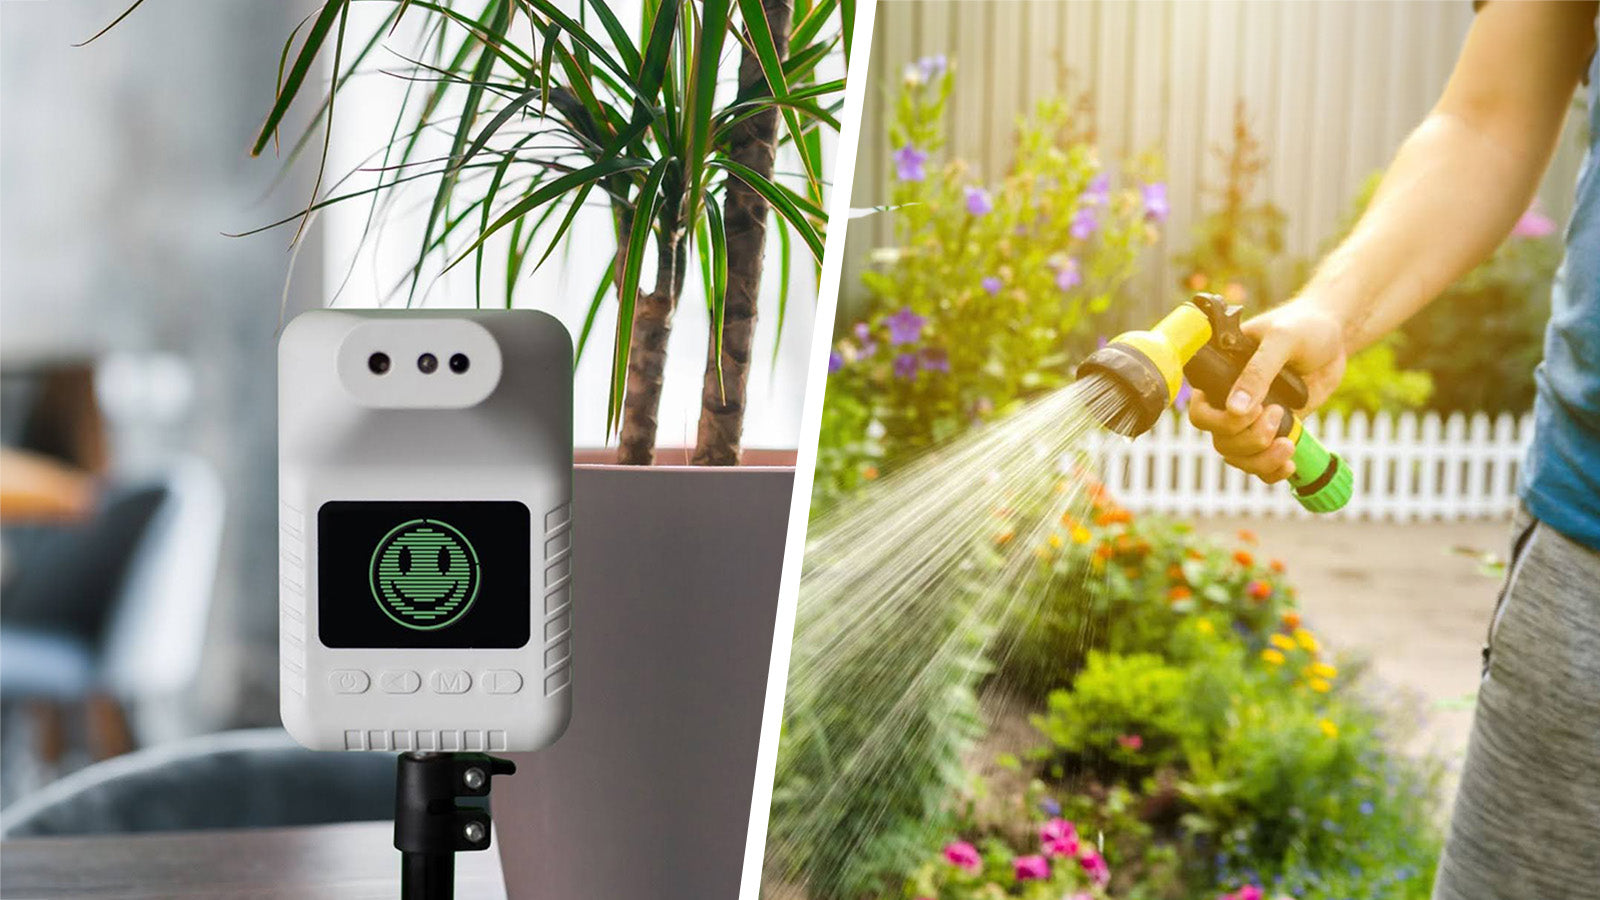 APRIL FOOLS: Introducing The Plant Emotion Detector and Bluetooth Hose Nozzle